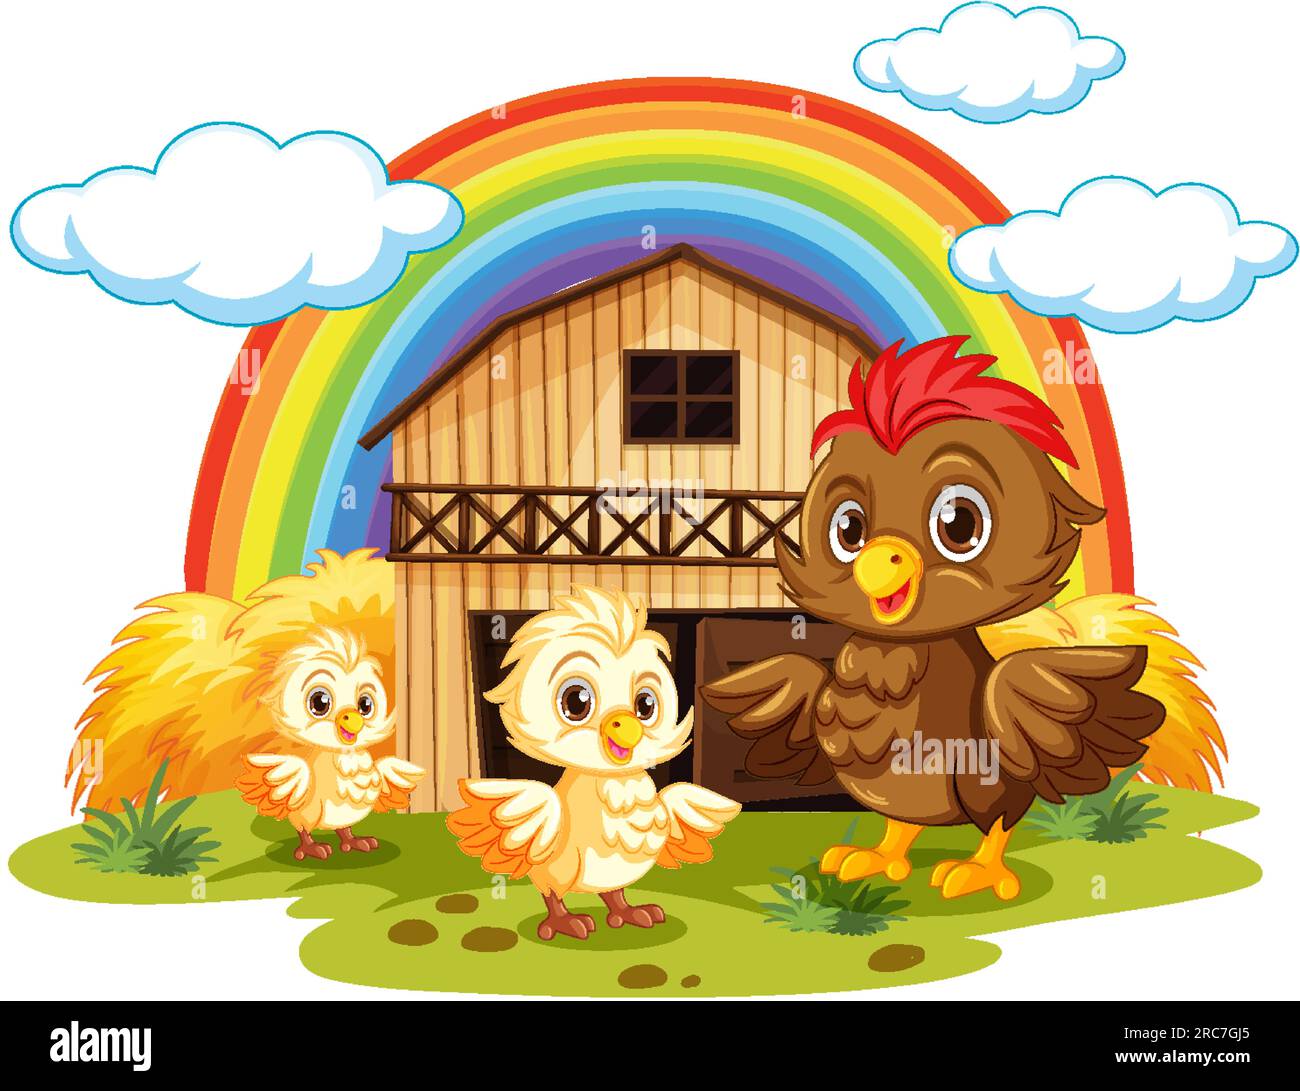 Mother Chicken with Baby Chick in Cartoon Style illustration Stock Vector